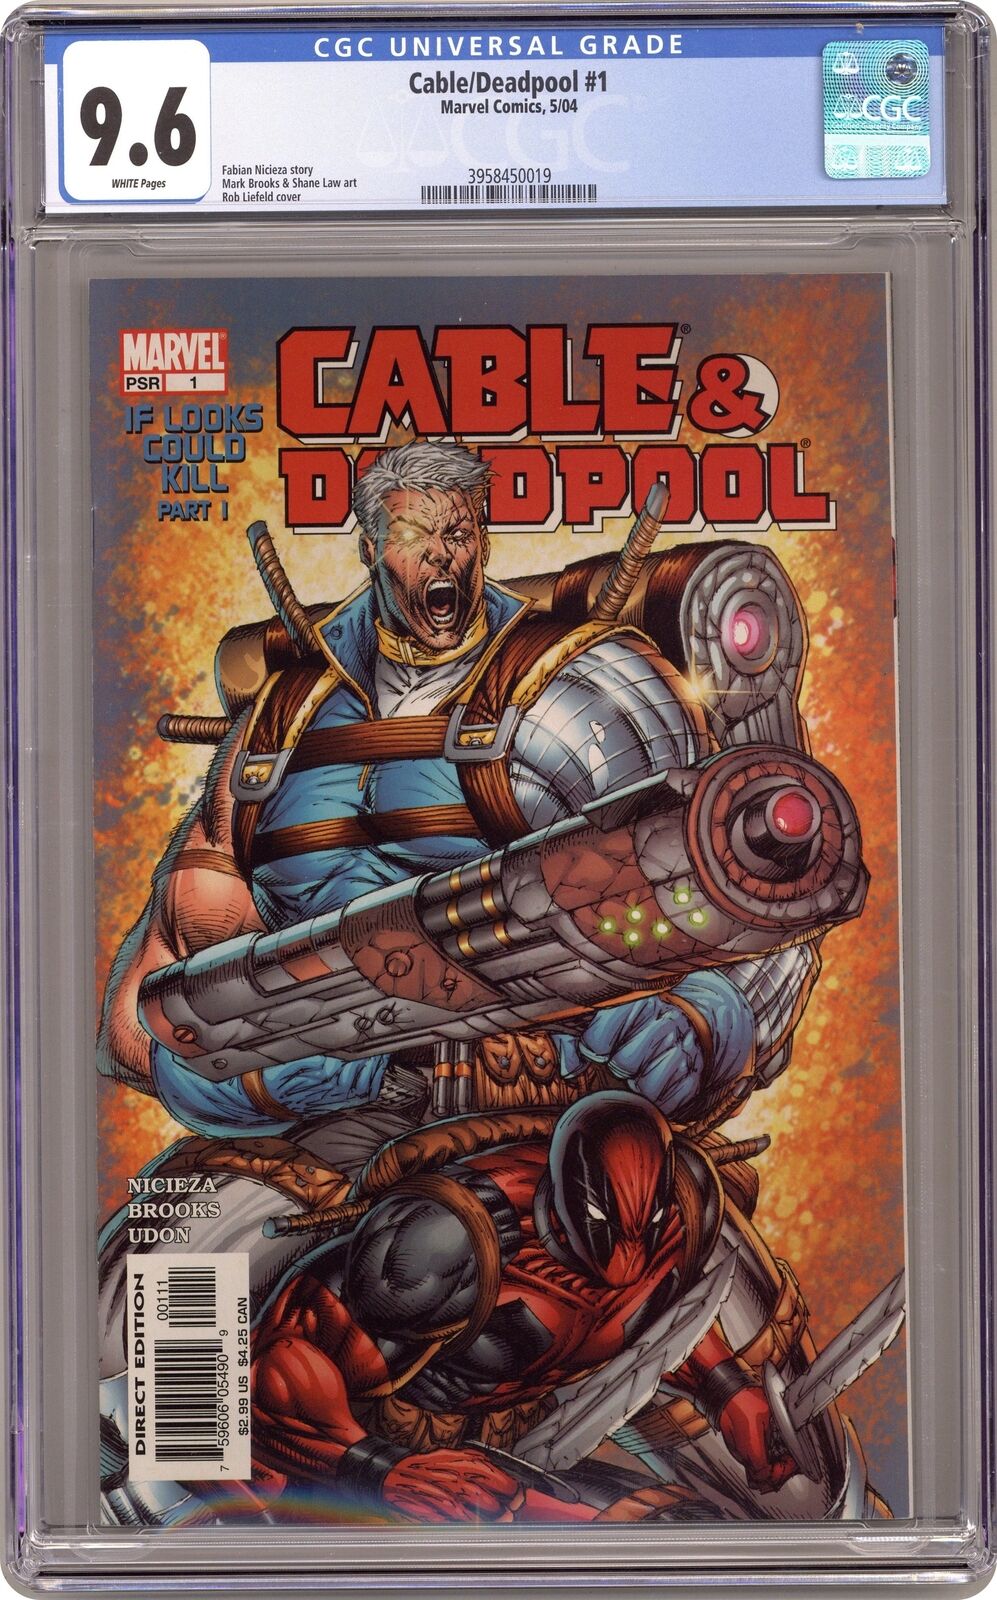 Cable and Deadpool #1 CGC 9.6 2004 3958450019